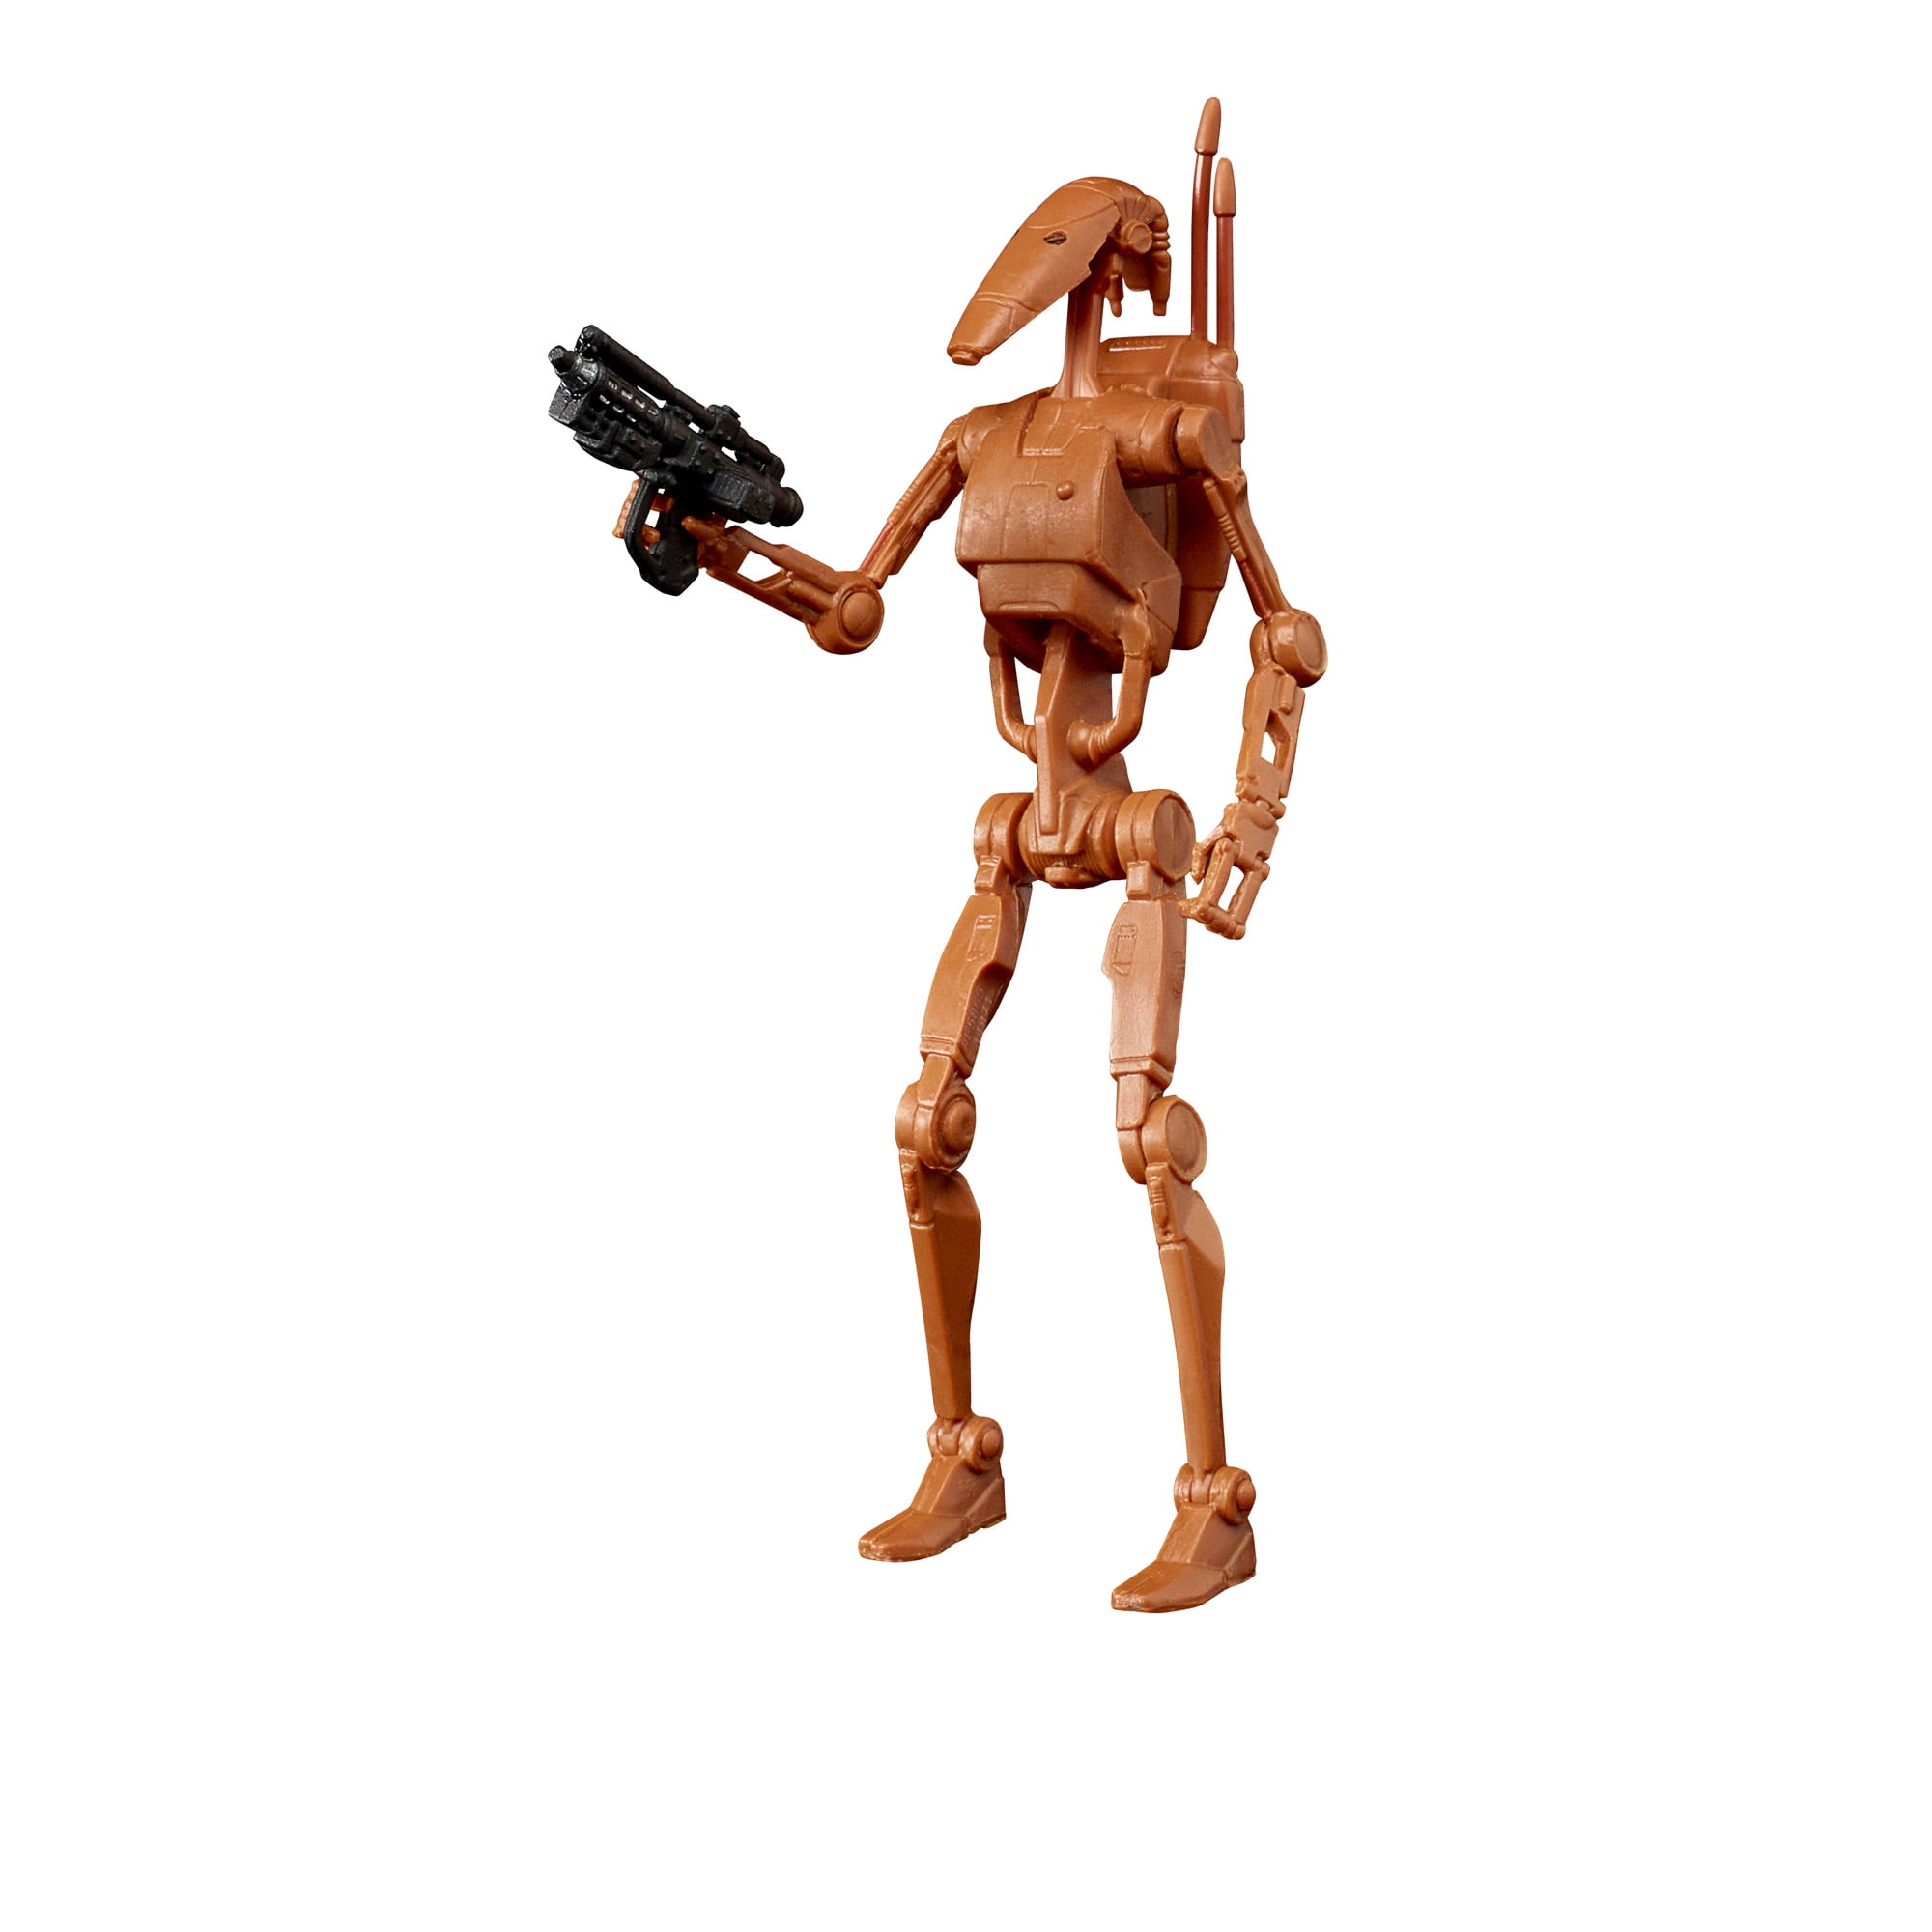 STAR WARS BATTLE DROID Commander Waxer Set The Clone Collection 3.75" FIGURE 